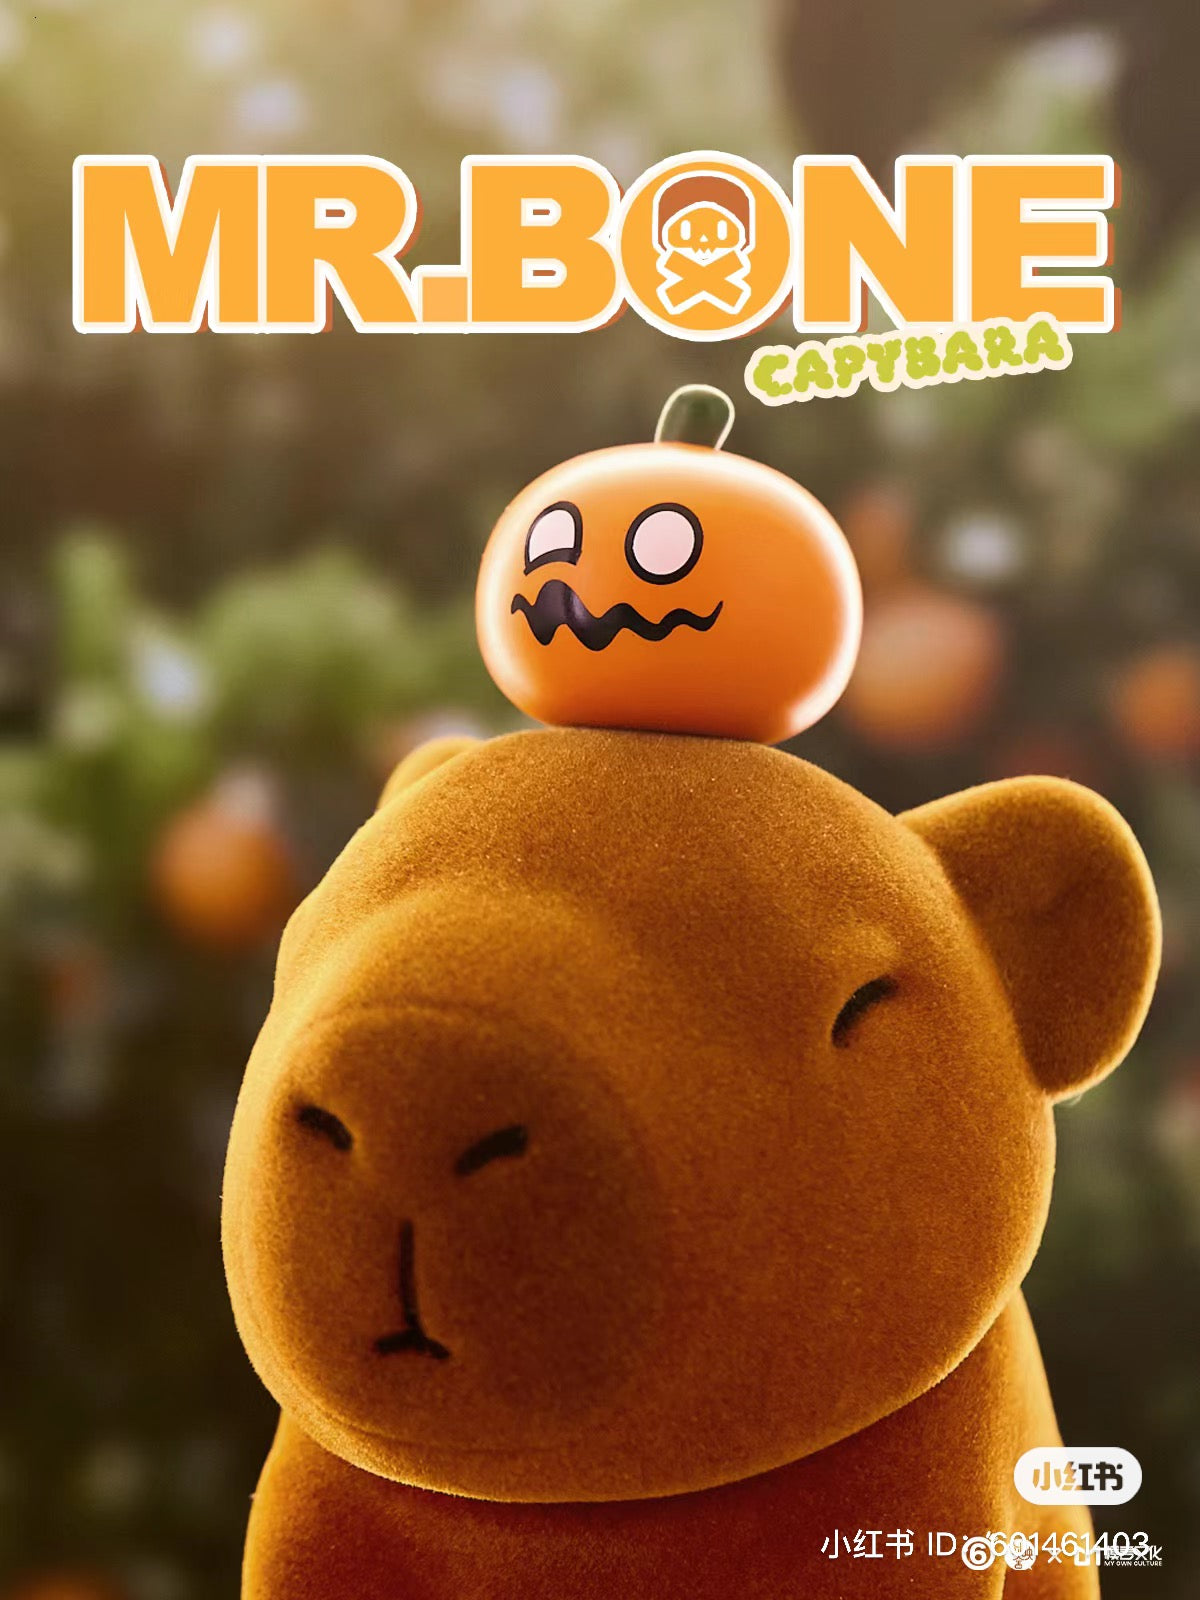 A blind box toy: Mr Bone Capybaras plush mascot with a small pumpkin on top. Preorder - Ships May 2024. Size: About 12CM high. Material: PVC, ABS/Vinyl. Includes Dog.